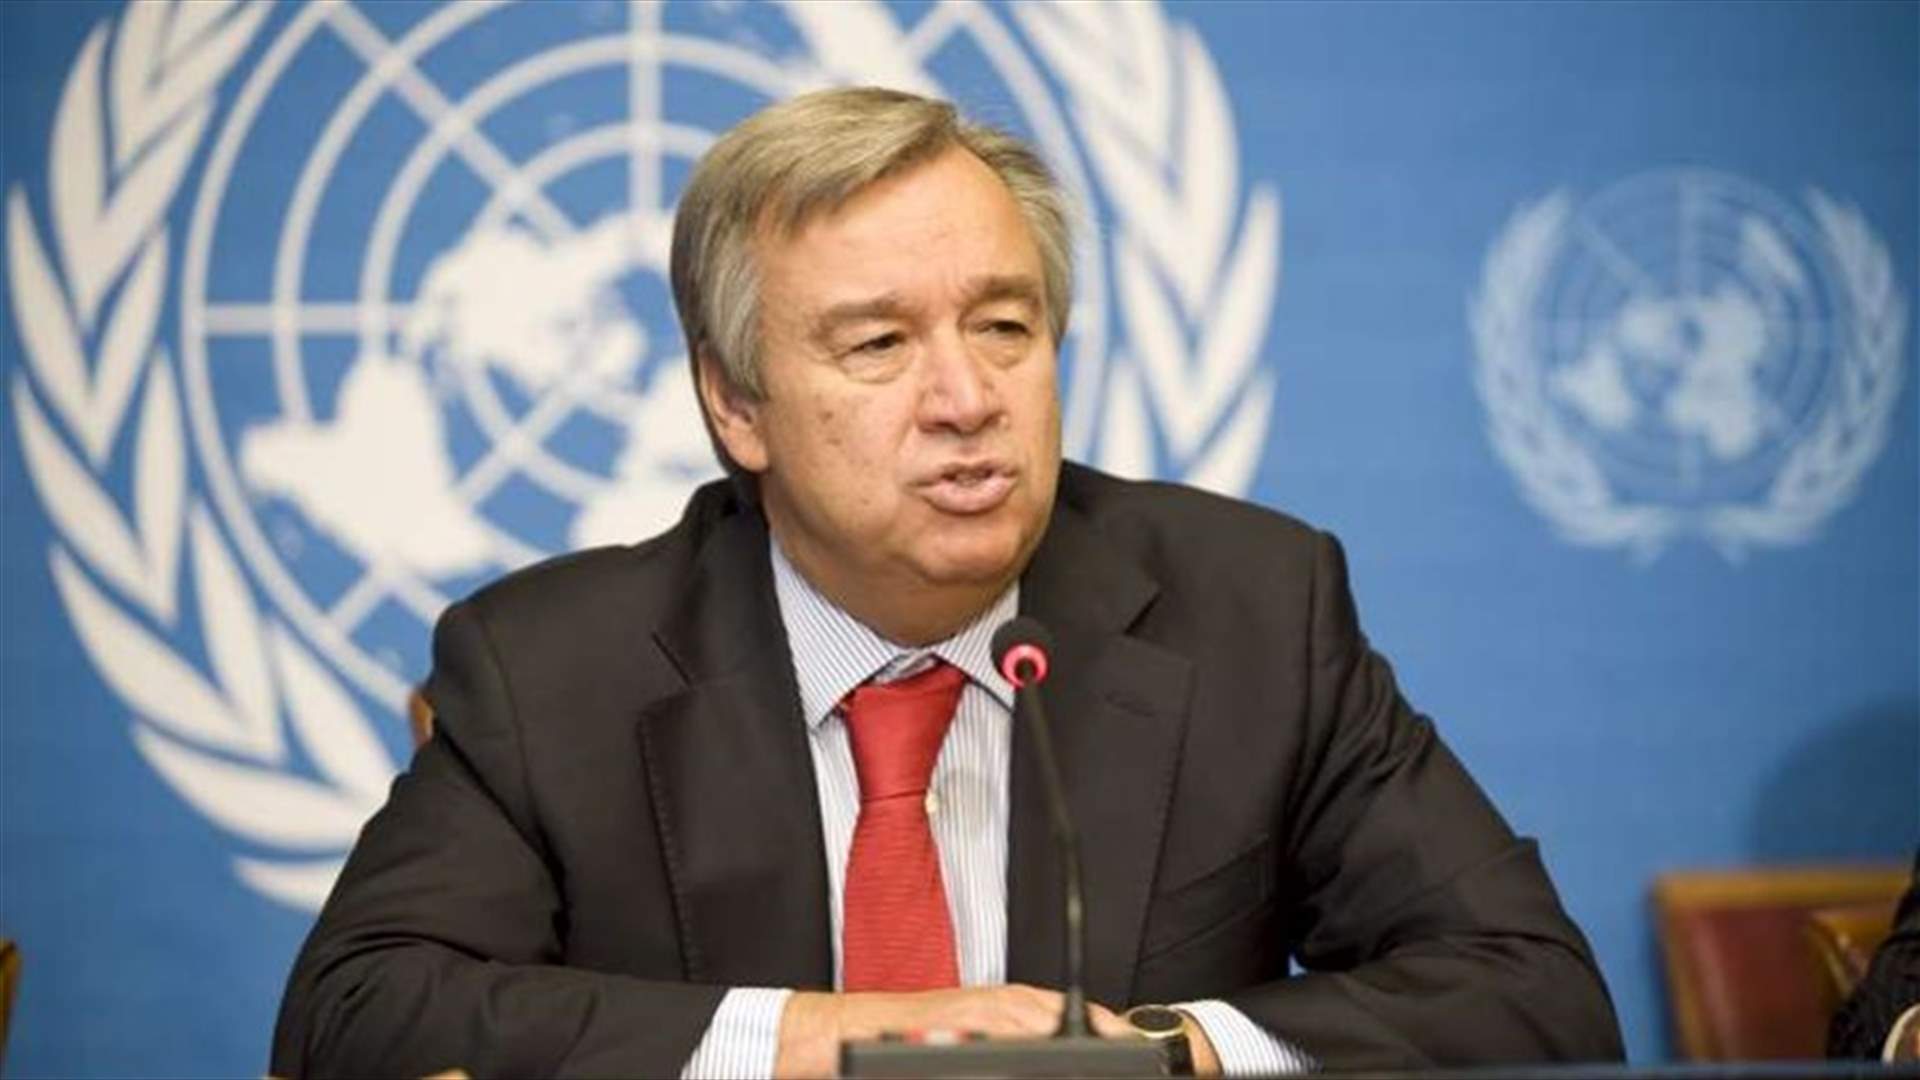 Portugal&#39;s Guterres, likely UN chief, wants to build bridges